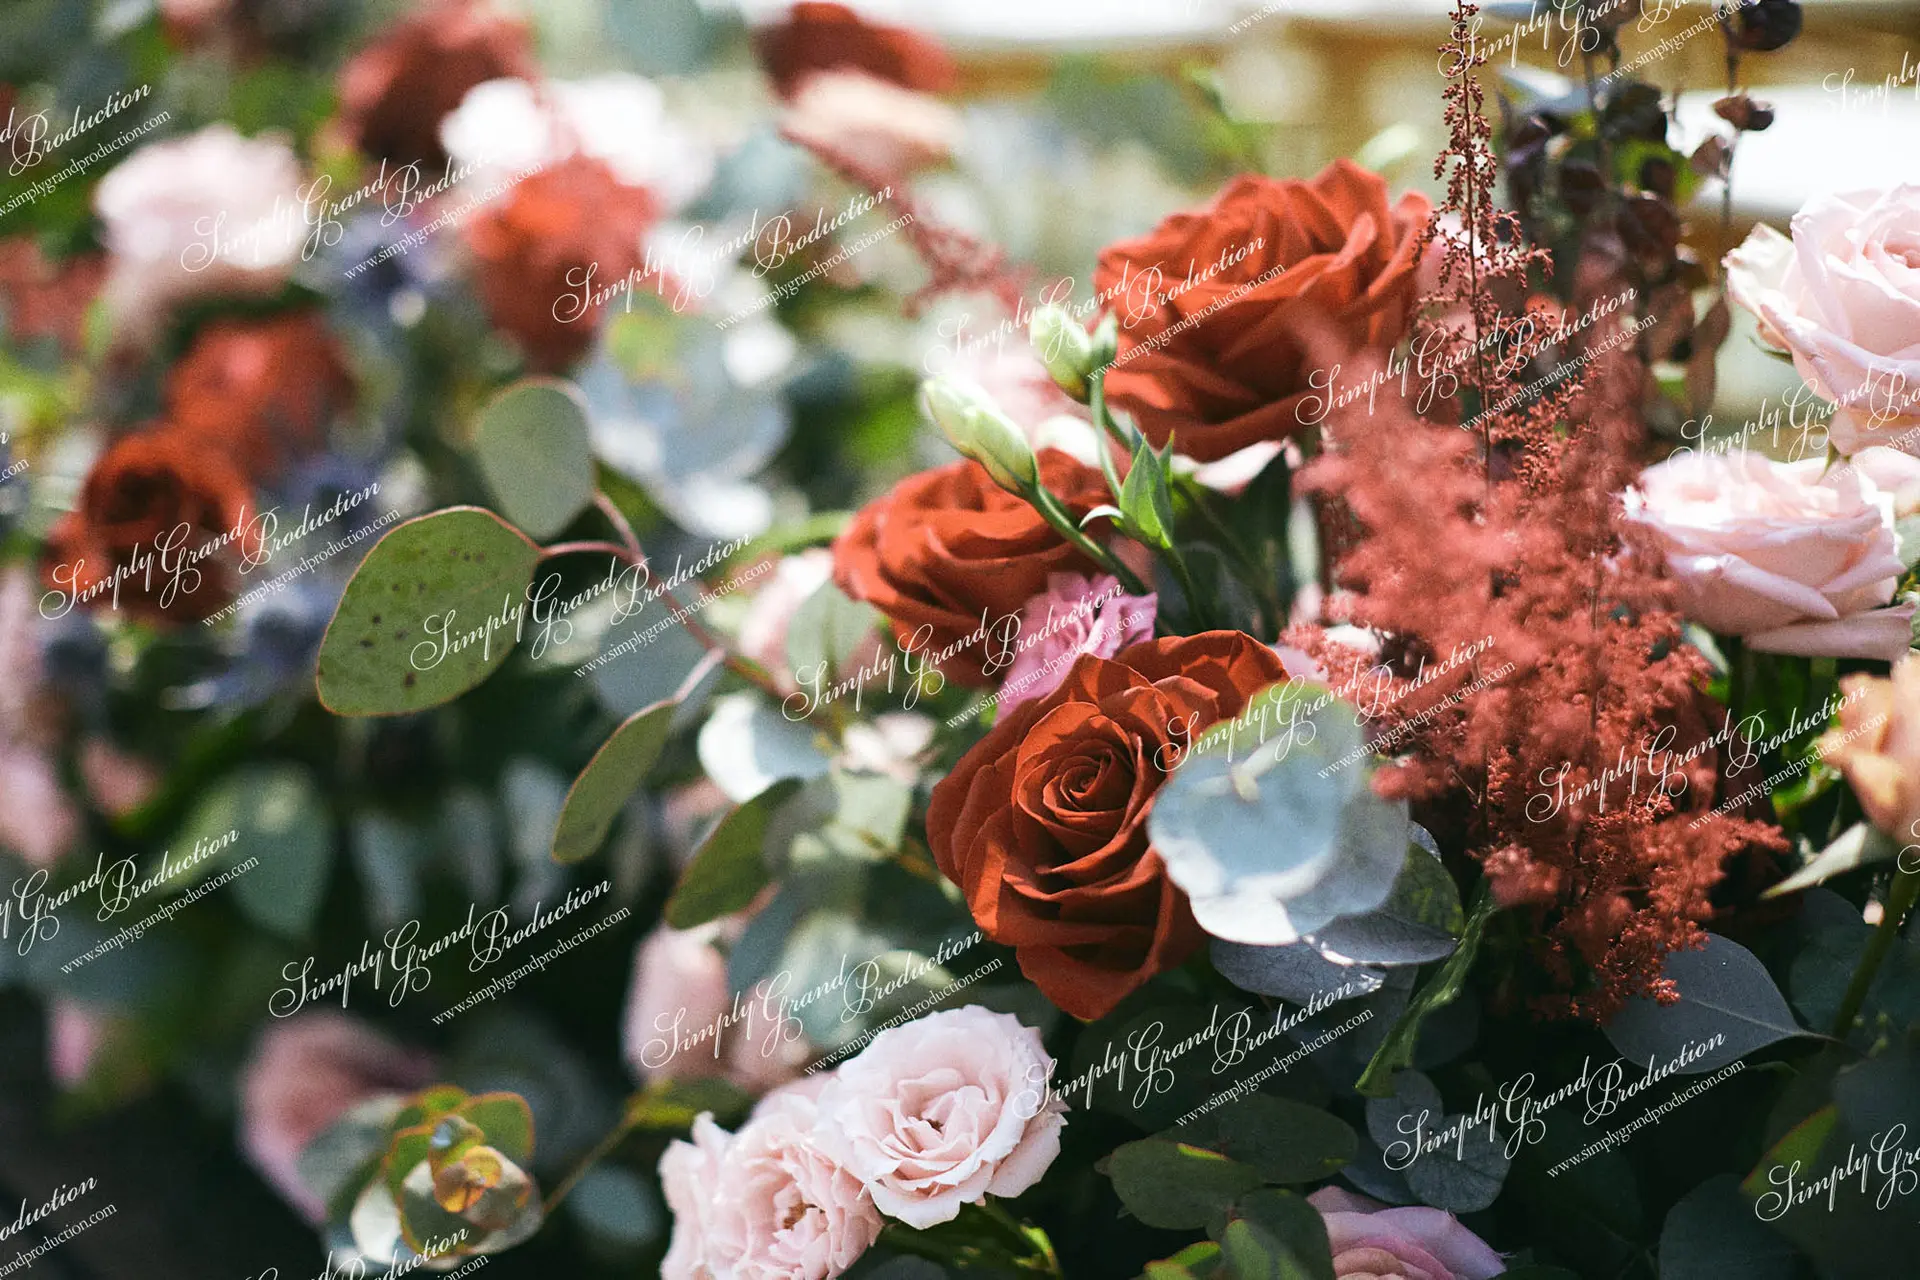 Simply_Grand_Production_Outdoor_wedding_decoration_rose_burgundy_pink_Country_Club_2_4.jpg